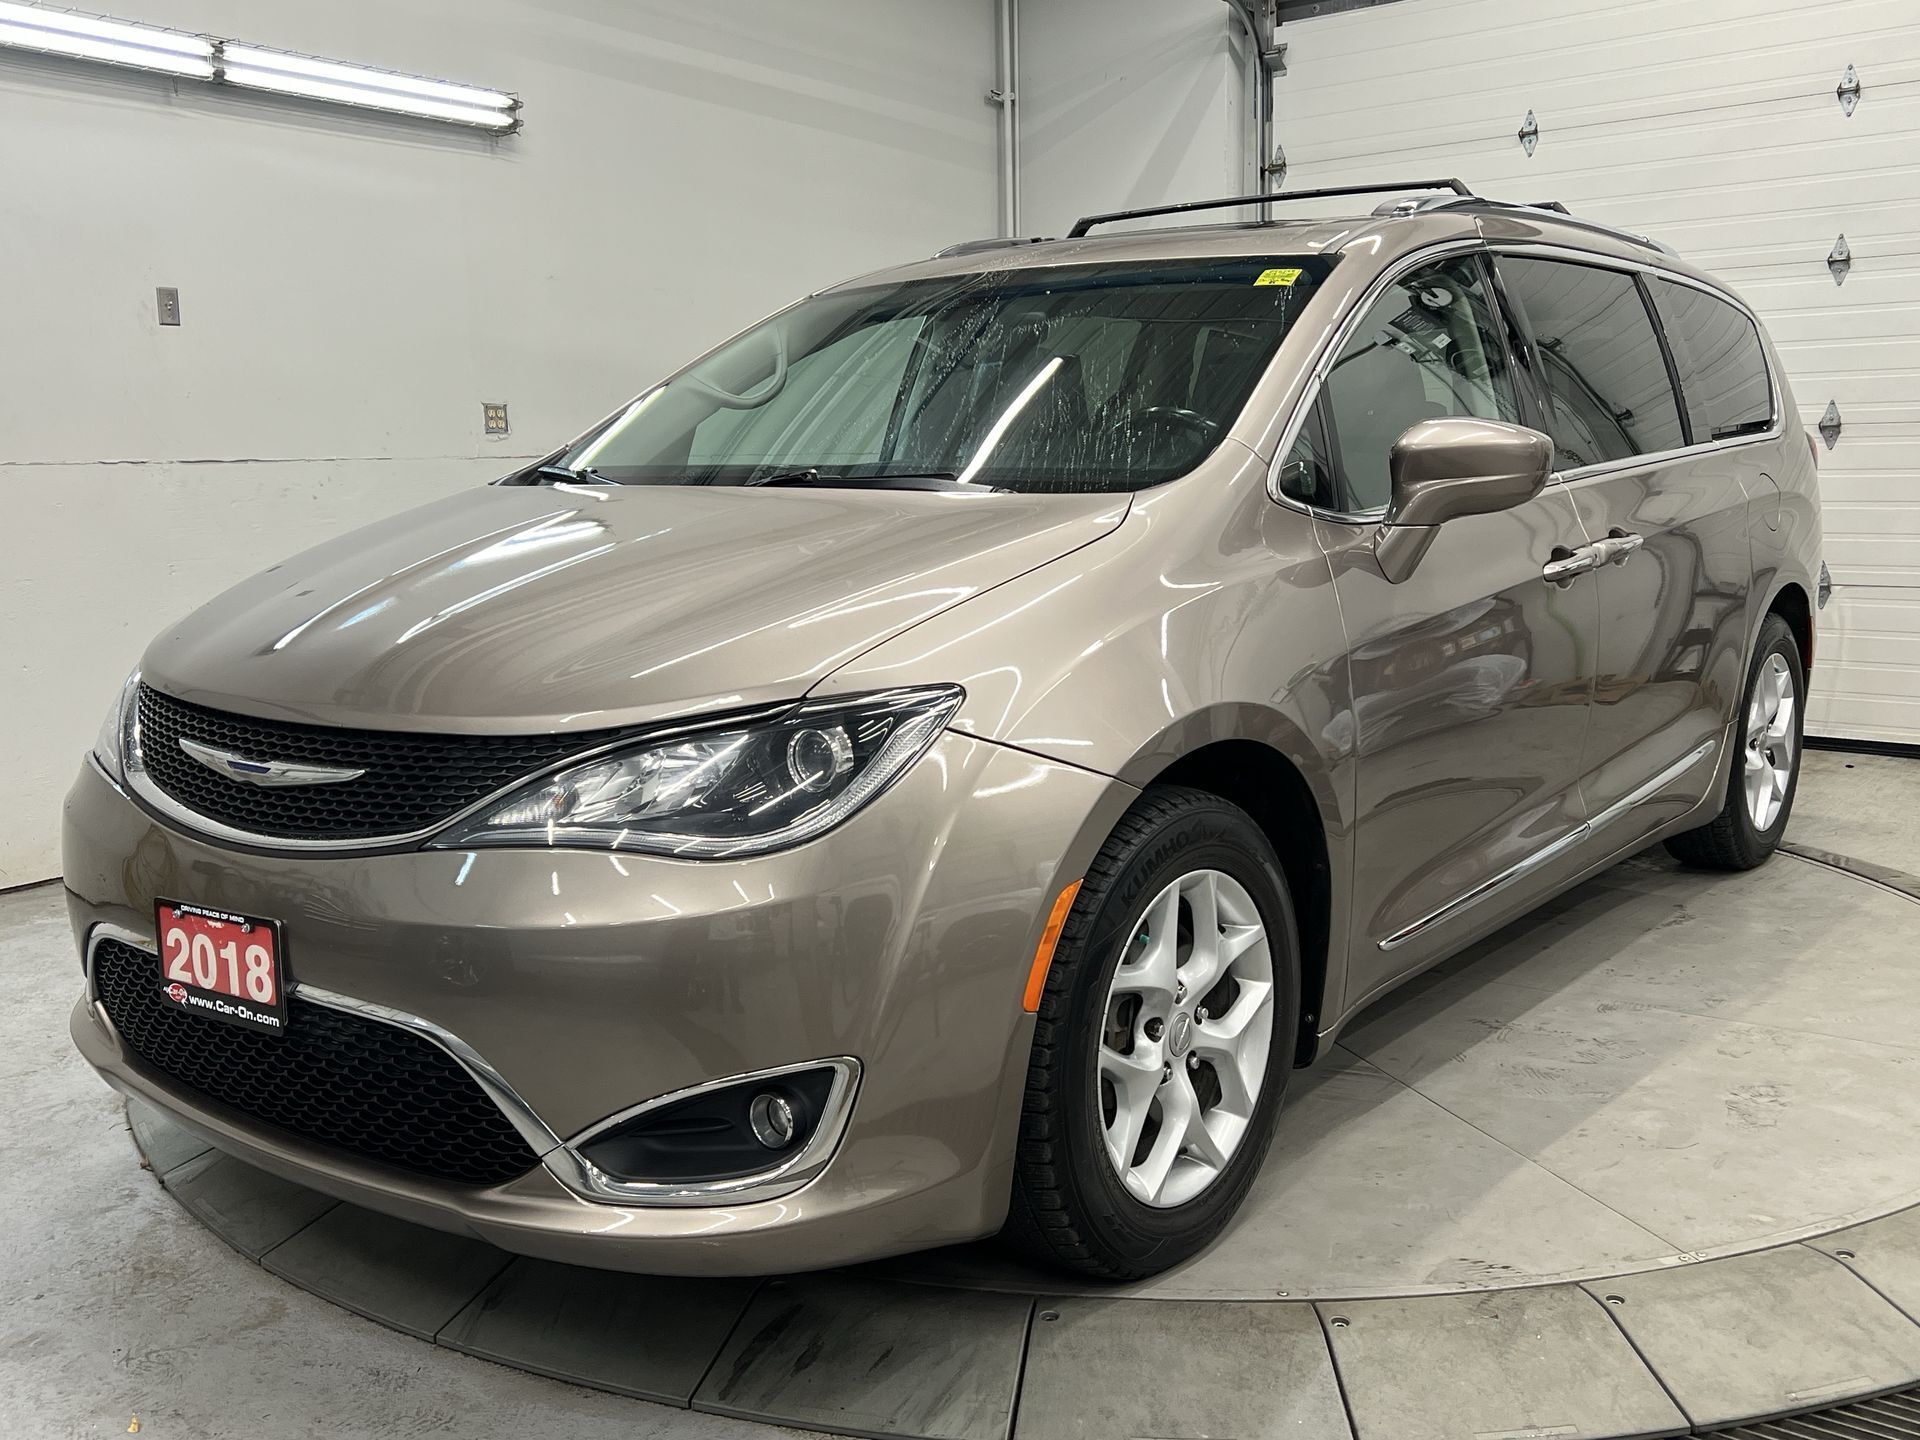 2018 Chrysler Pacifica TOURING L PLUS | PANO ROOF | DVD |LEATHER |CARPLAY